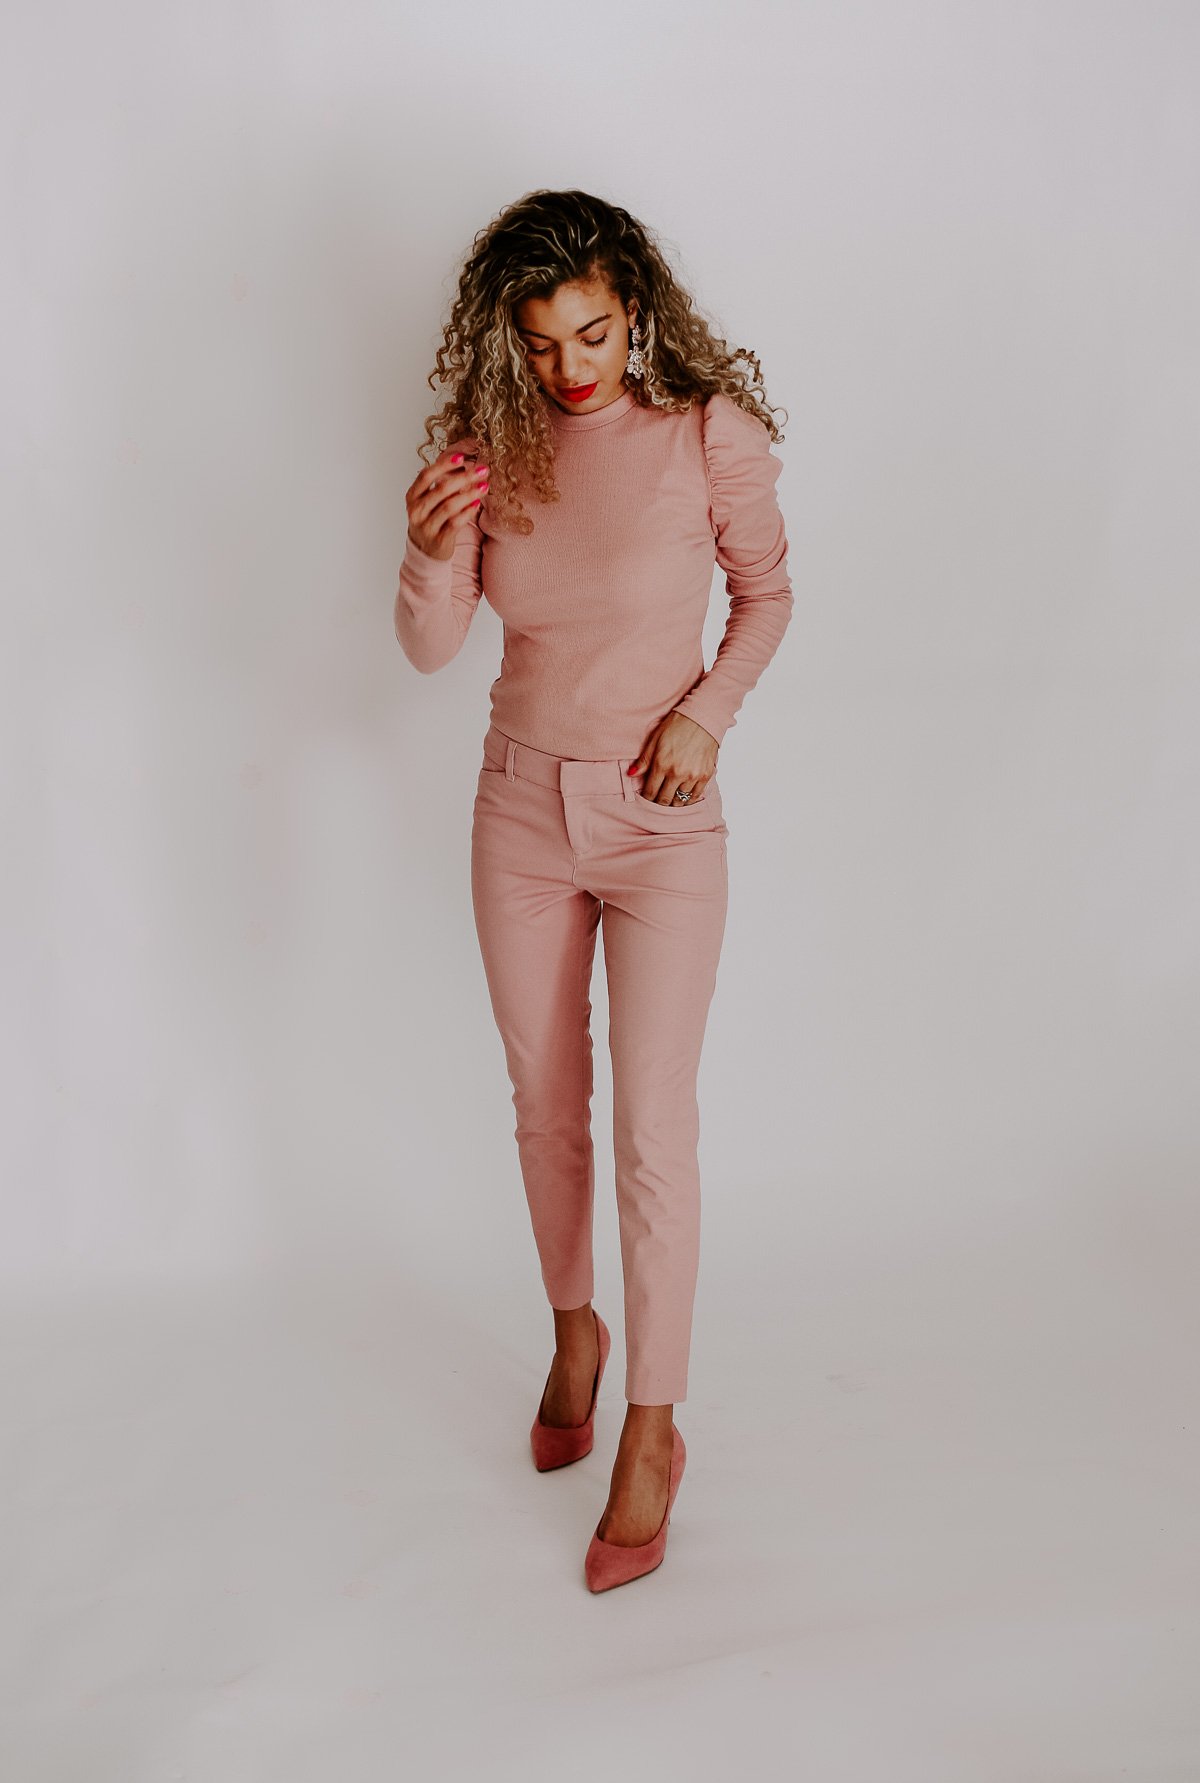 This all millennial pink outfit is perfect for Valentines Day or its a great spring outfit idea too!